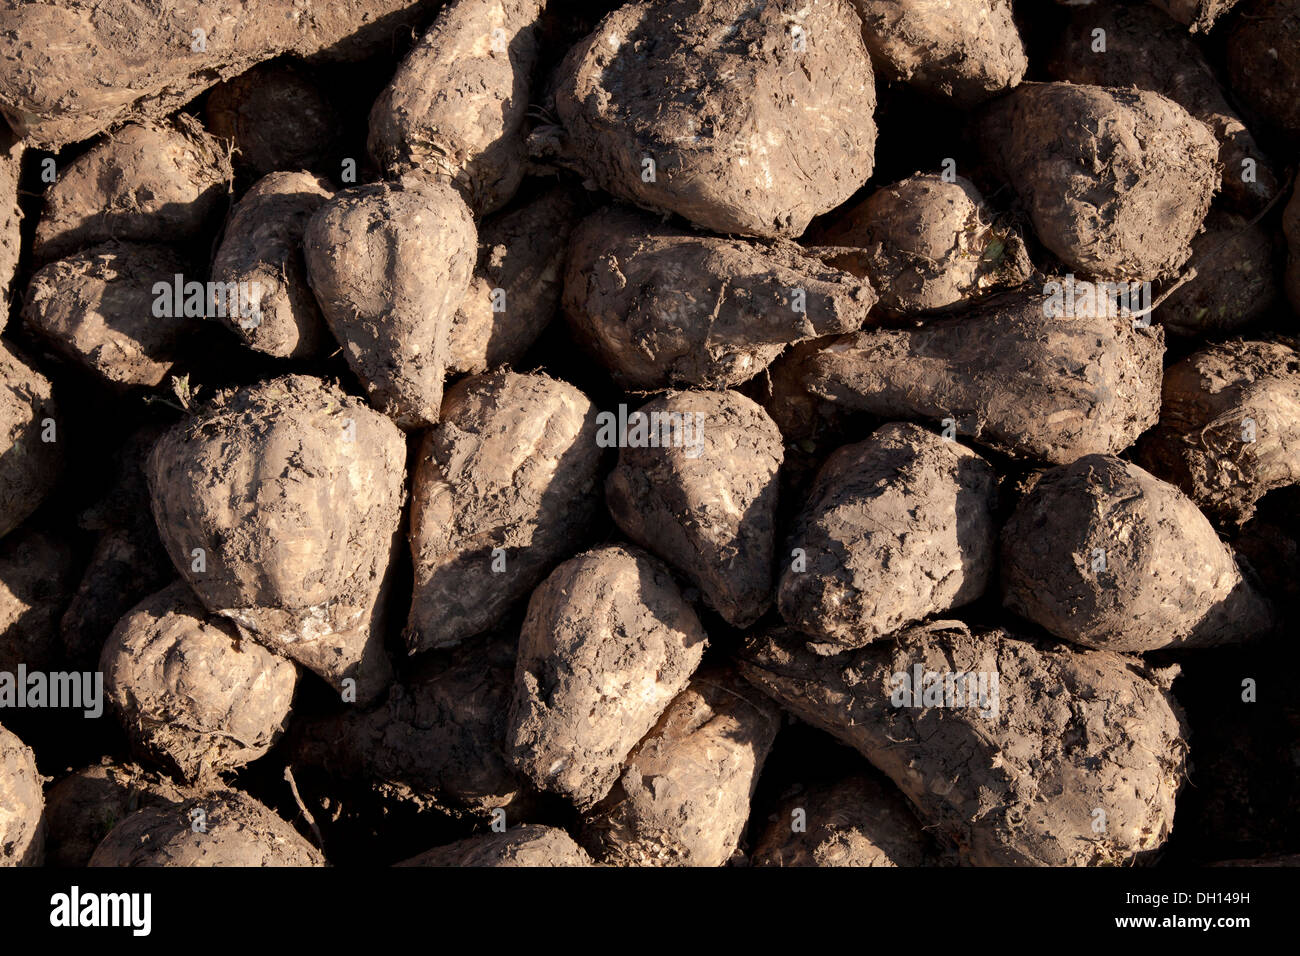 harvest of sugar beets Stock Photo